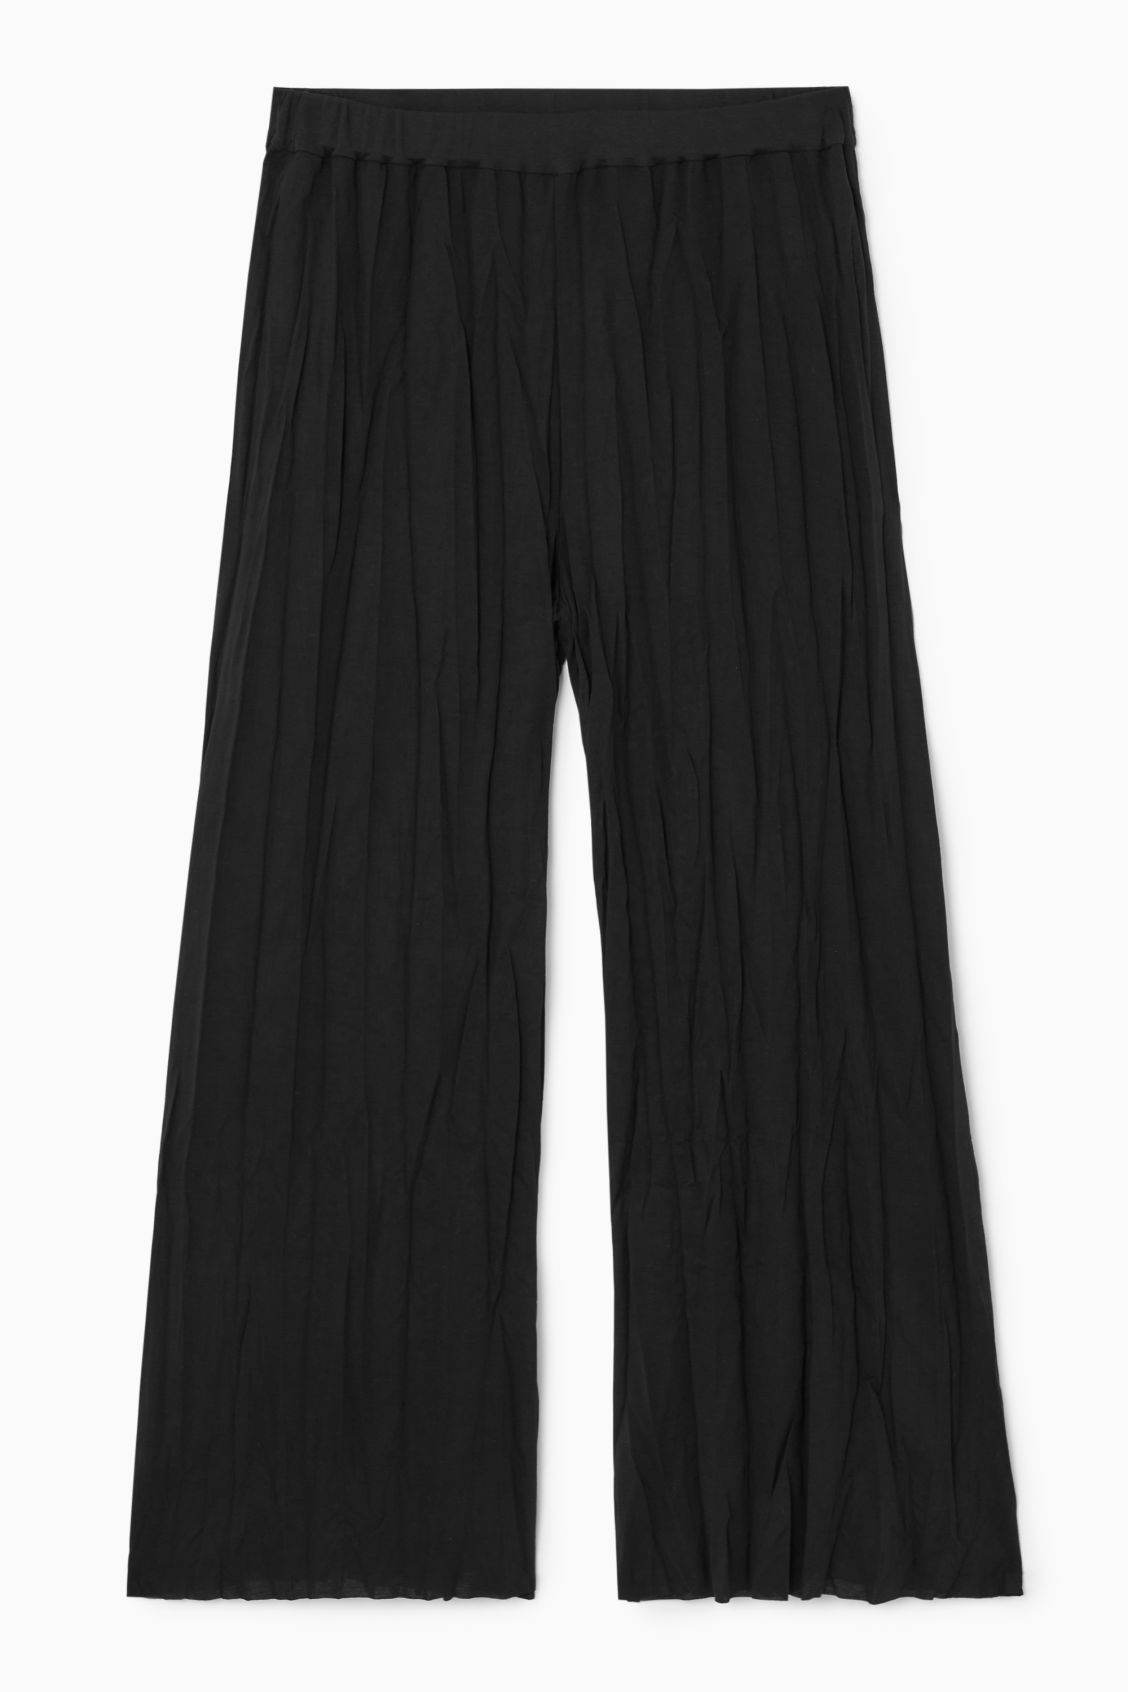 CRINKLED JERSEY WIDE-LEG TROUSERS | COS UK